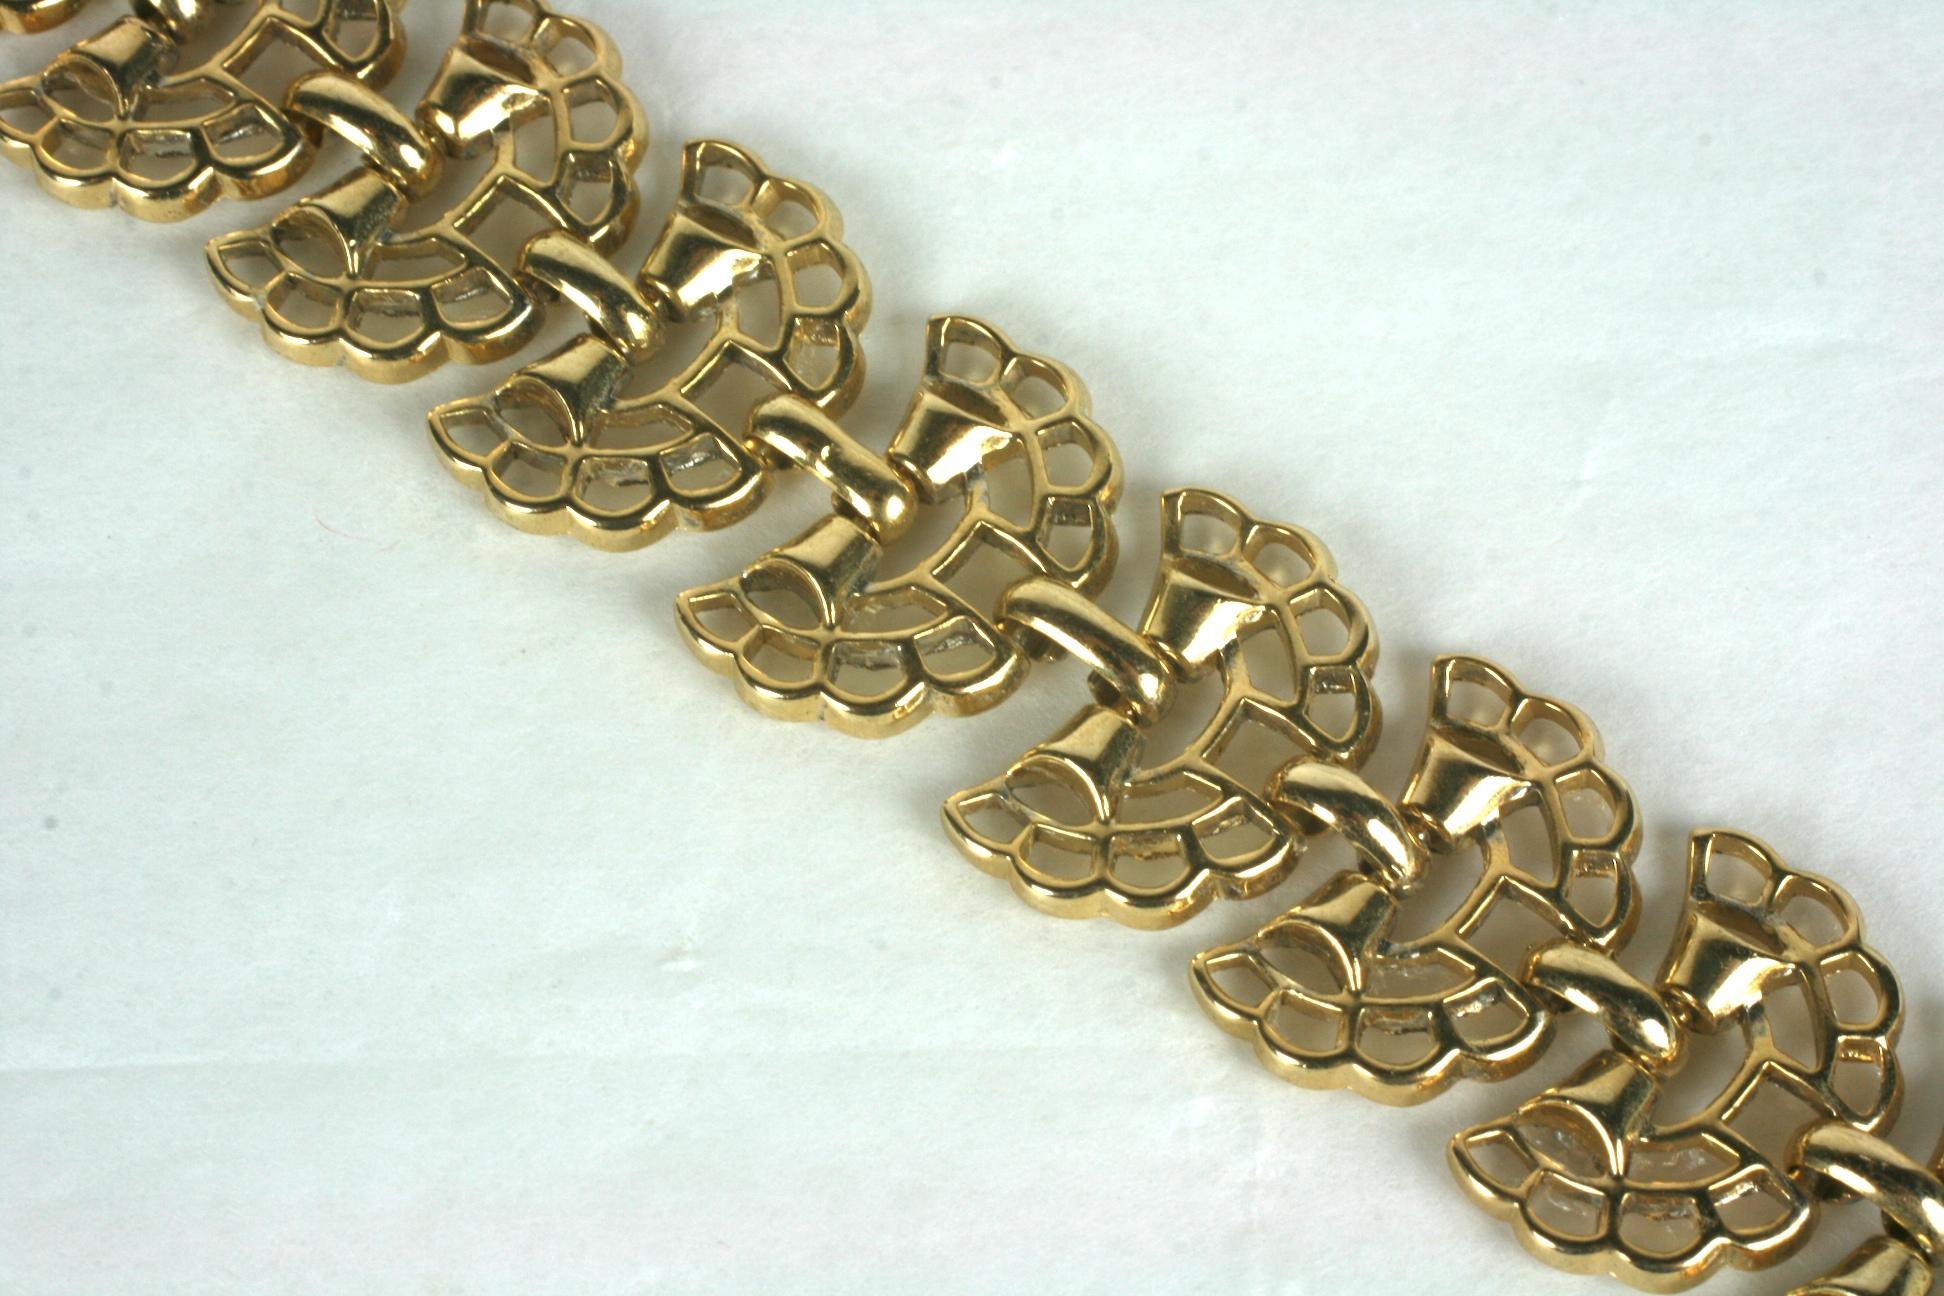 Elegant Alfred Philippe for Trifari retro link bracelet composed of  gold plated base metal pierced fan shaped links.
Excellent Condition, Signed Trifari. 
Length  7